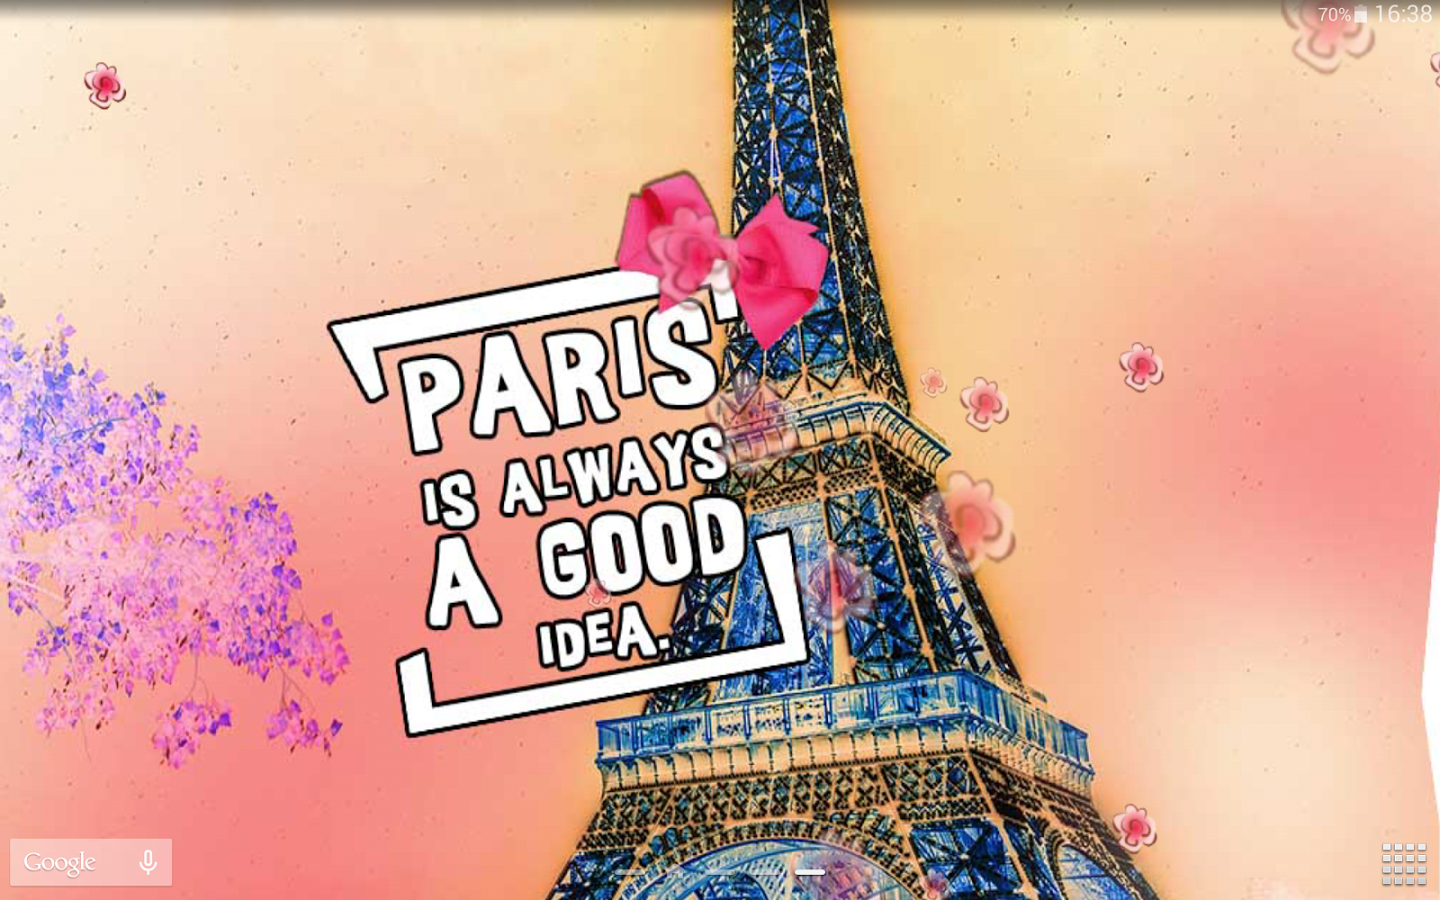 Free Download Cute Paris Live Wallpaper Android Apps On Google Play 1440x900 For Your Desktop Mobile Tablet Explore 46 Girly Paris Wallpaper Cute Paris Wallpaper Cute Paris France Wallpaper - download roblox live wallpaper google play softwares